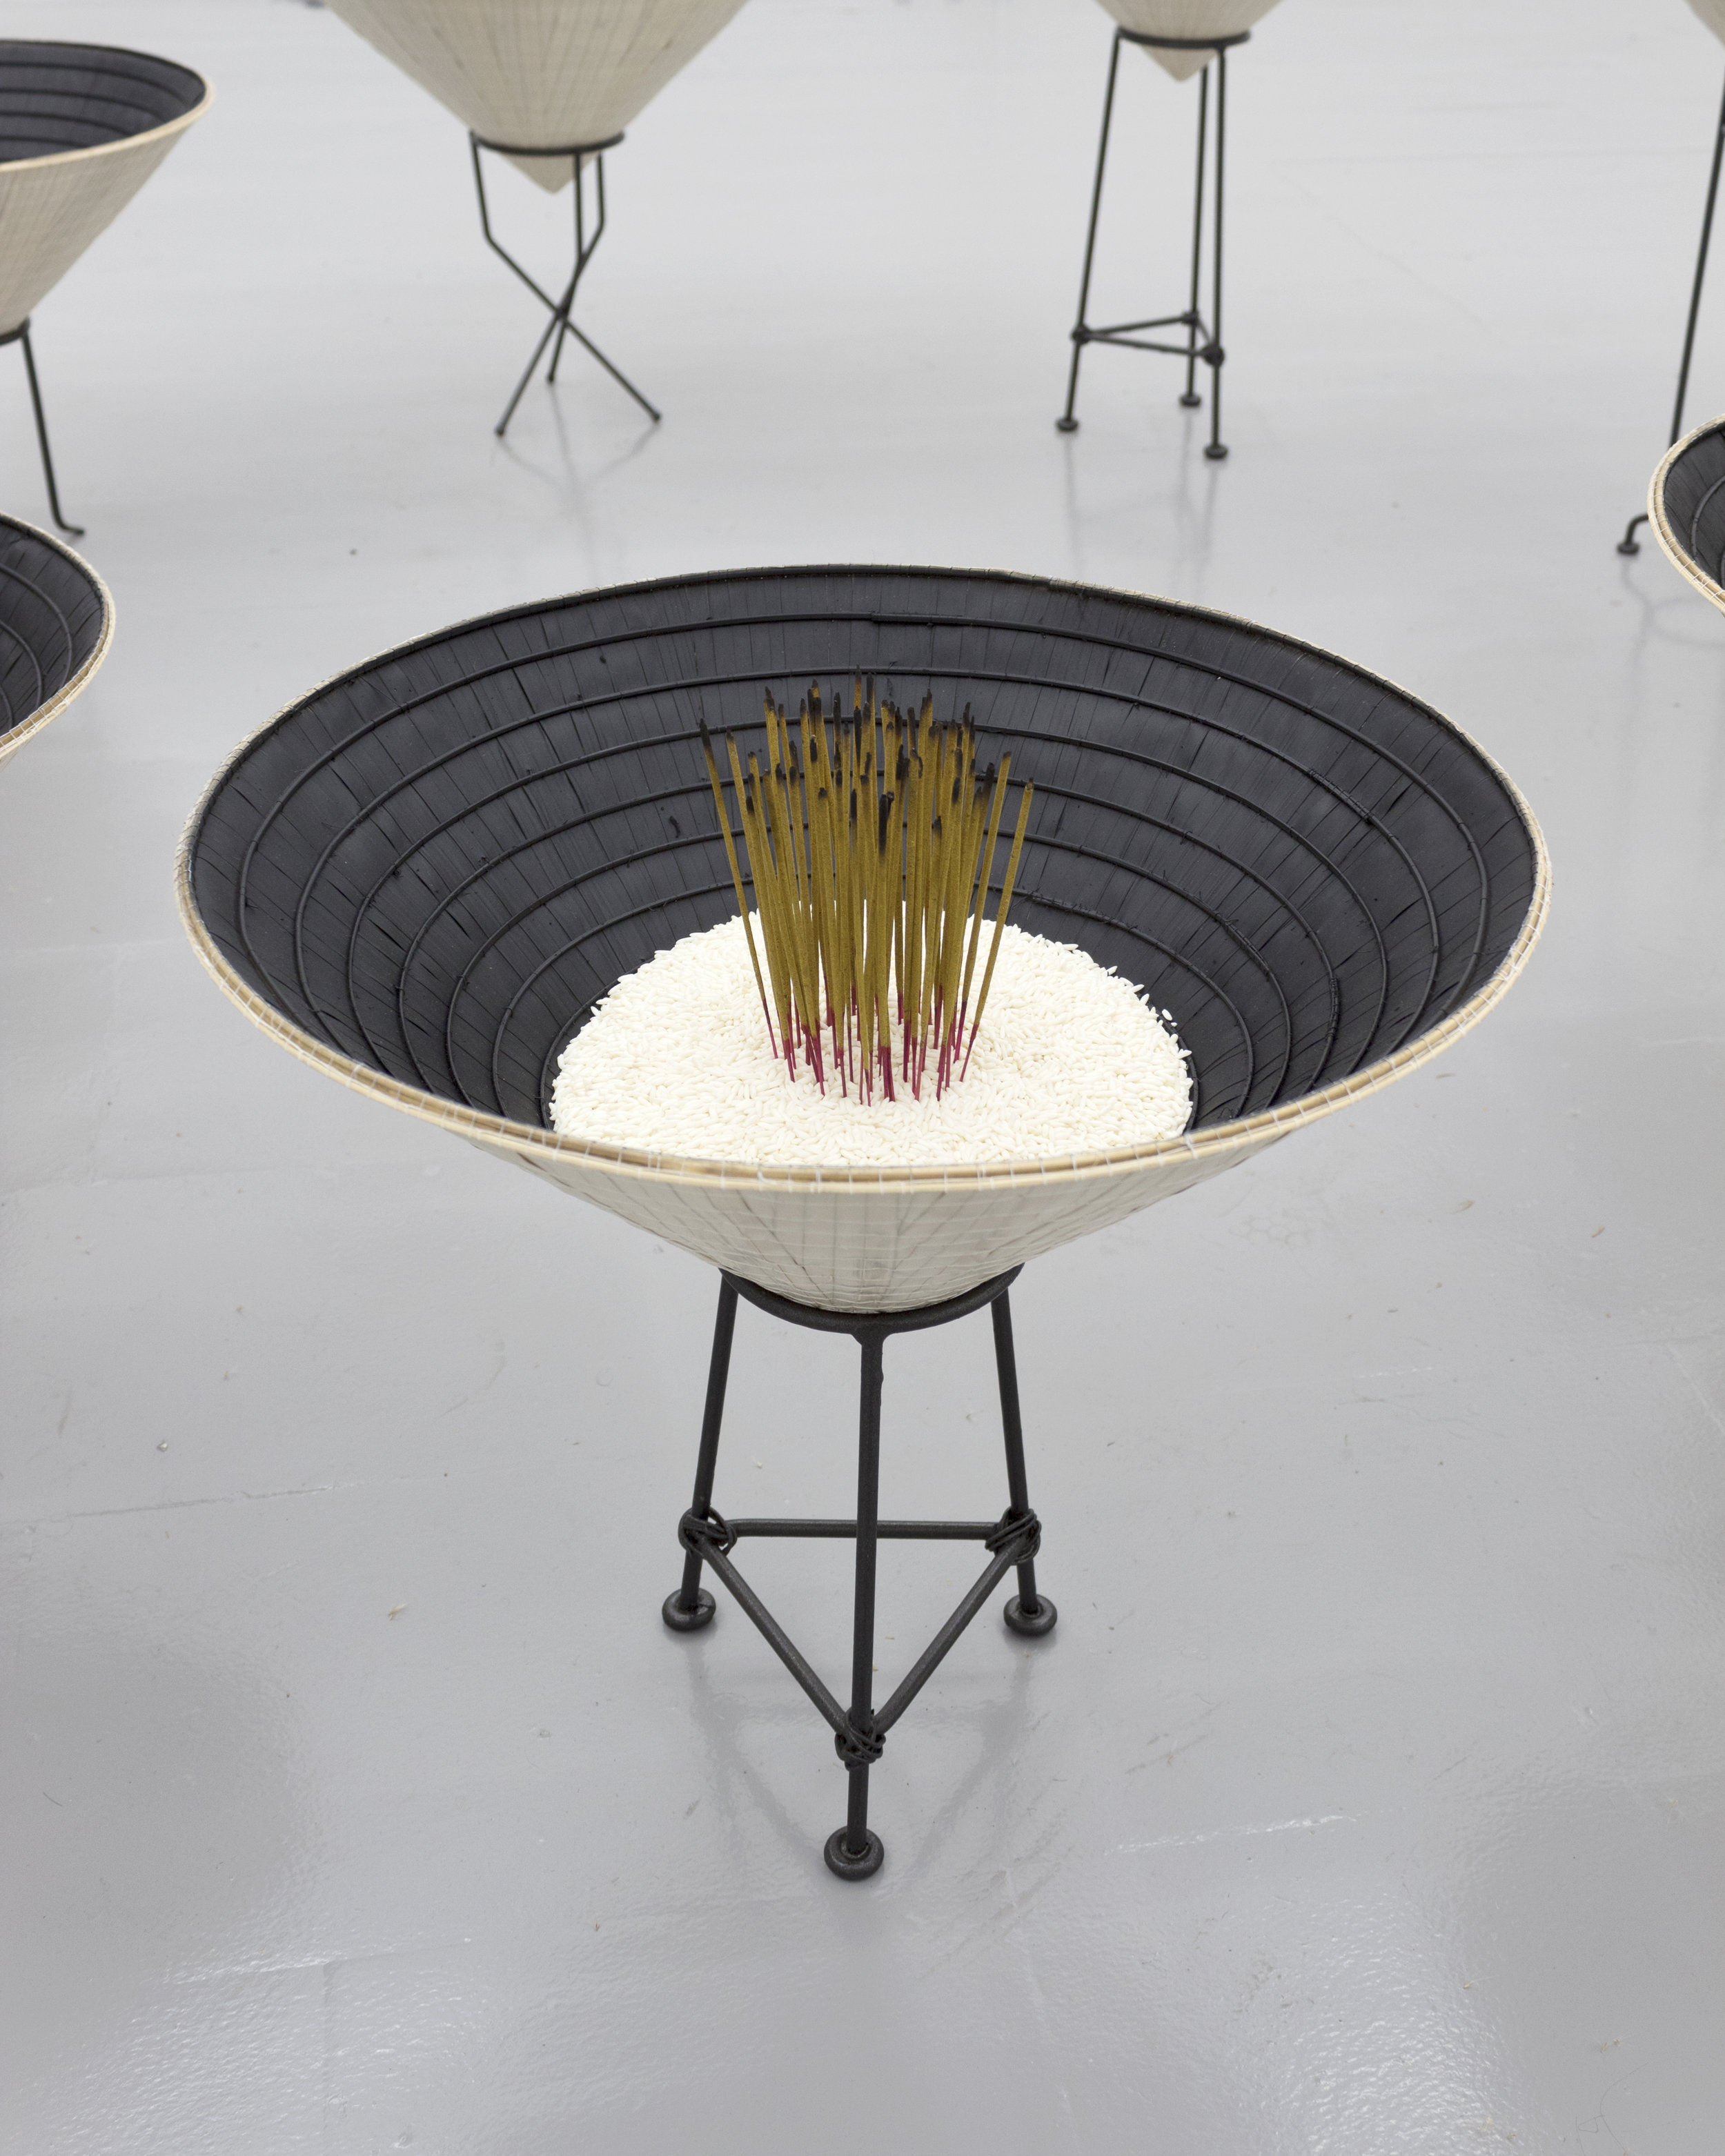  Millian Giang Lien Pham,  Reforge: 9 Phases (Three),  2019. Conical hat, sweet rice, incense, metal stand 